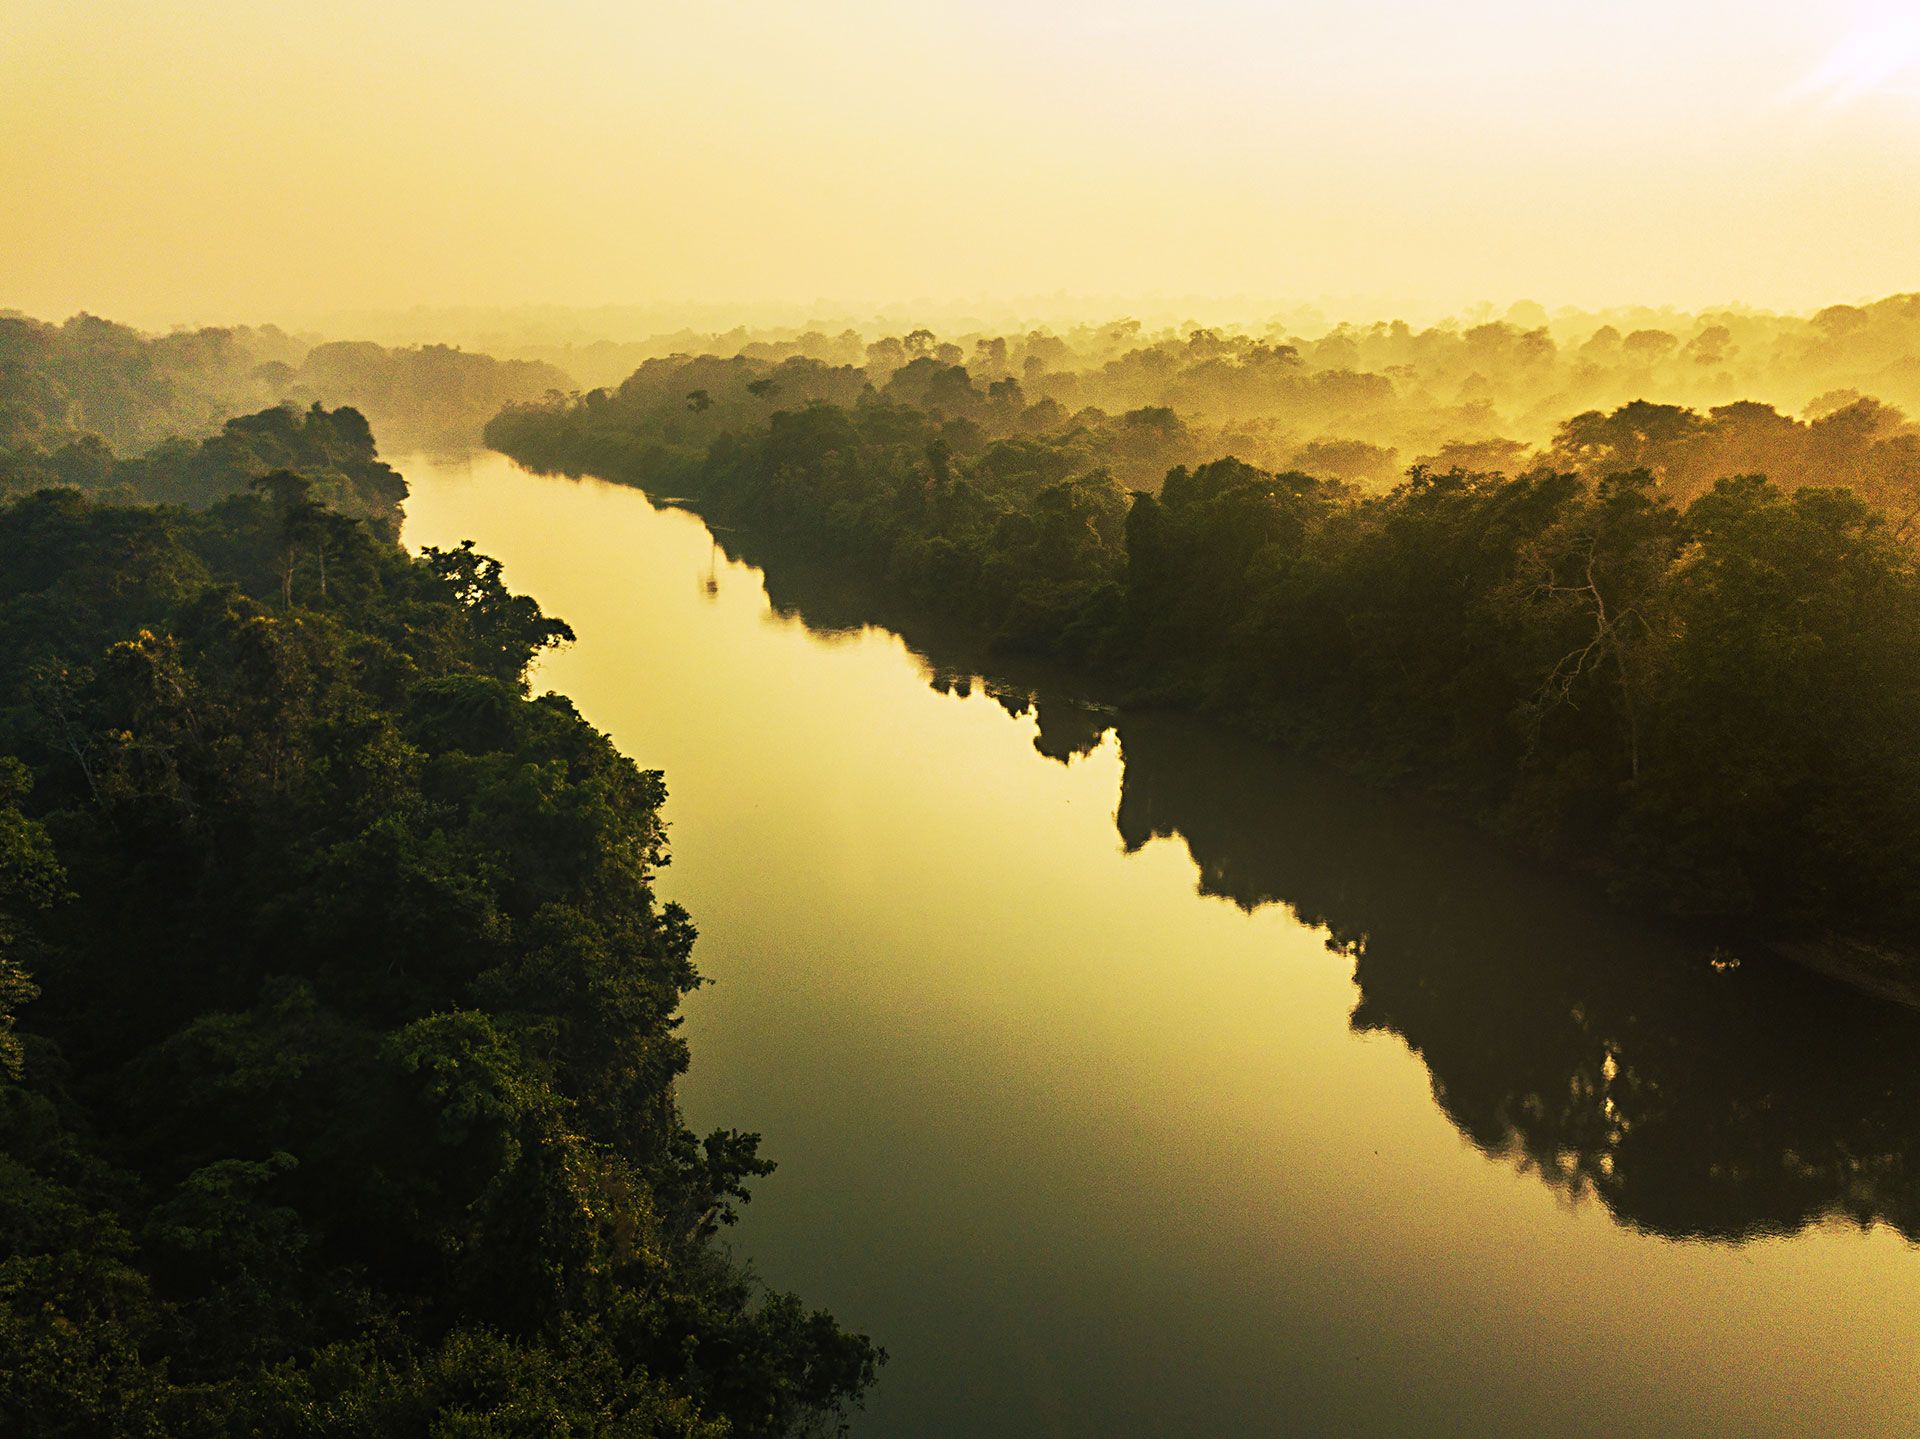 "Jaci Paraná River: One of the main rivers that divide Rondônia and has been inhabited for centuries by the Karipuna." Image by Fabio Nascimento. Brazil, 2019.